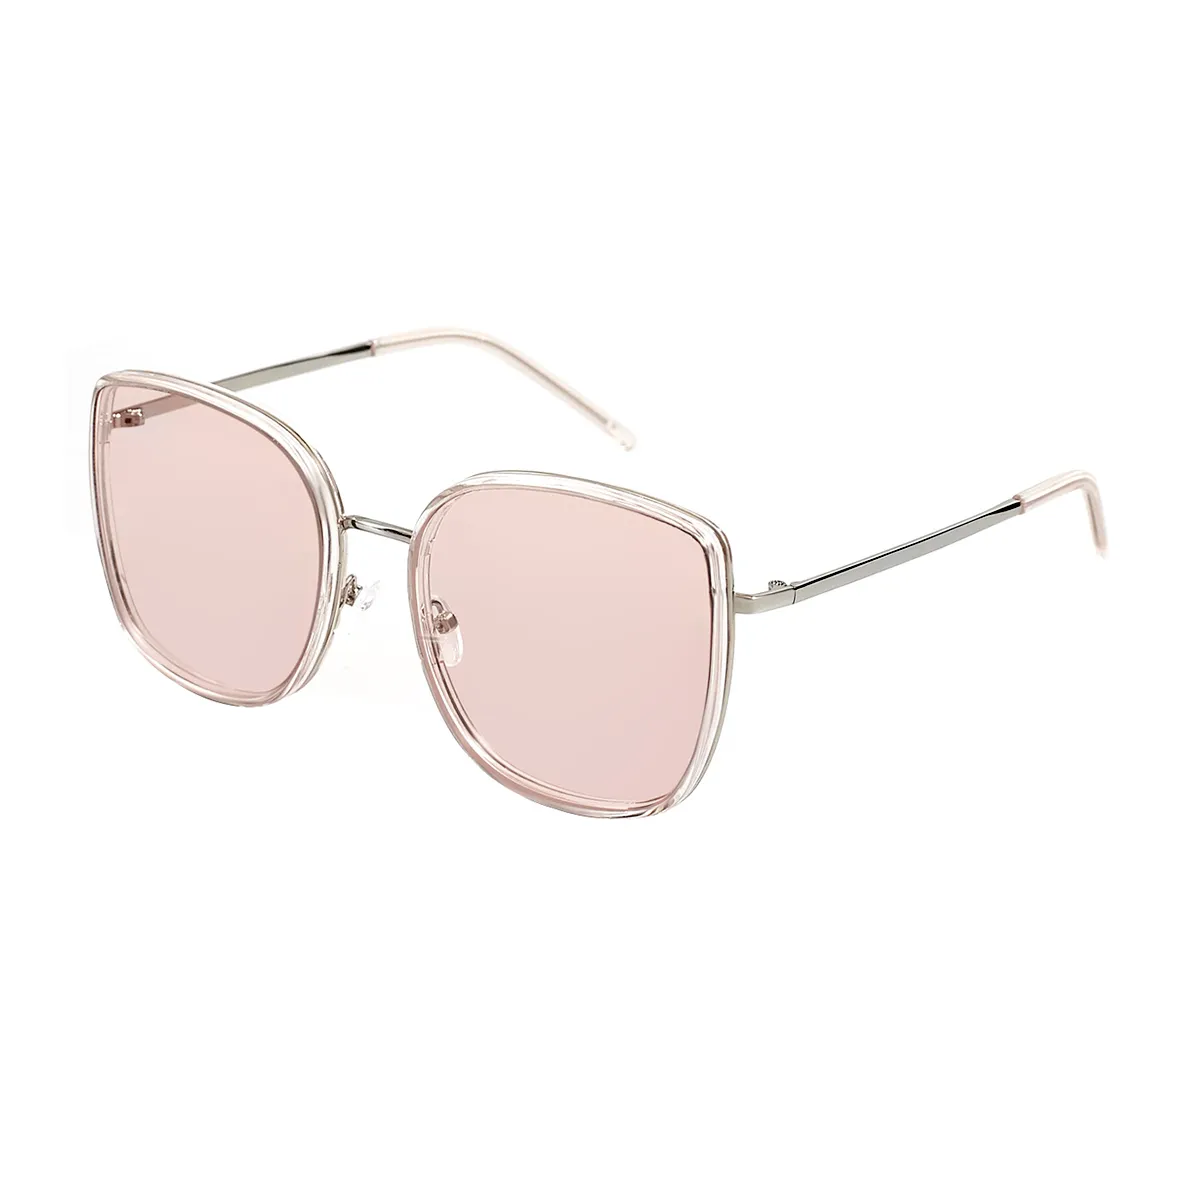 Hannah - Square Pink Sunglasses for Women